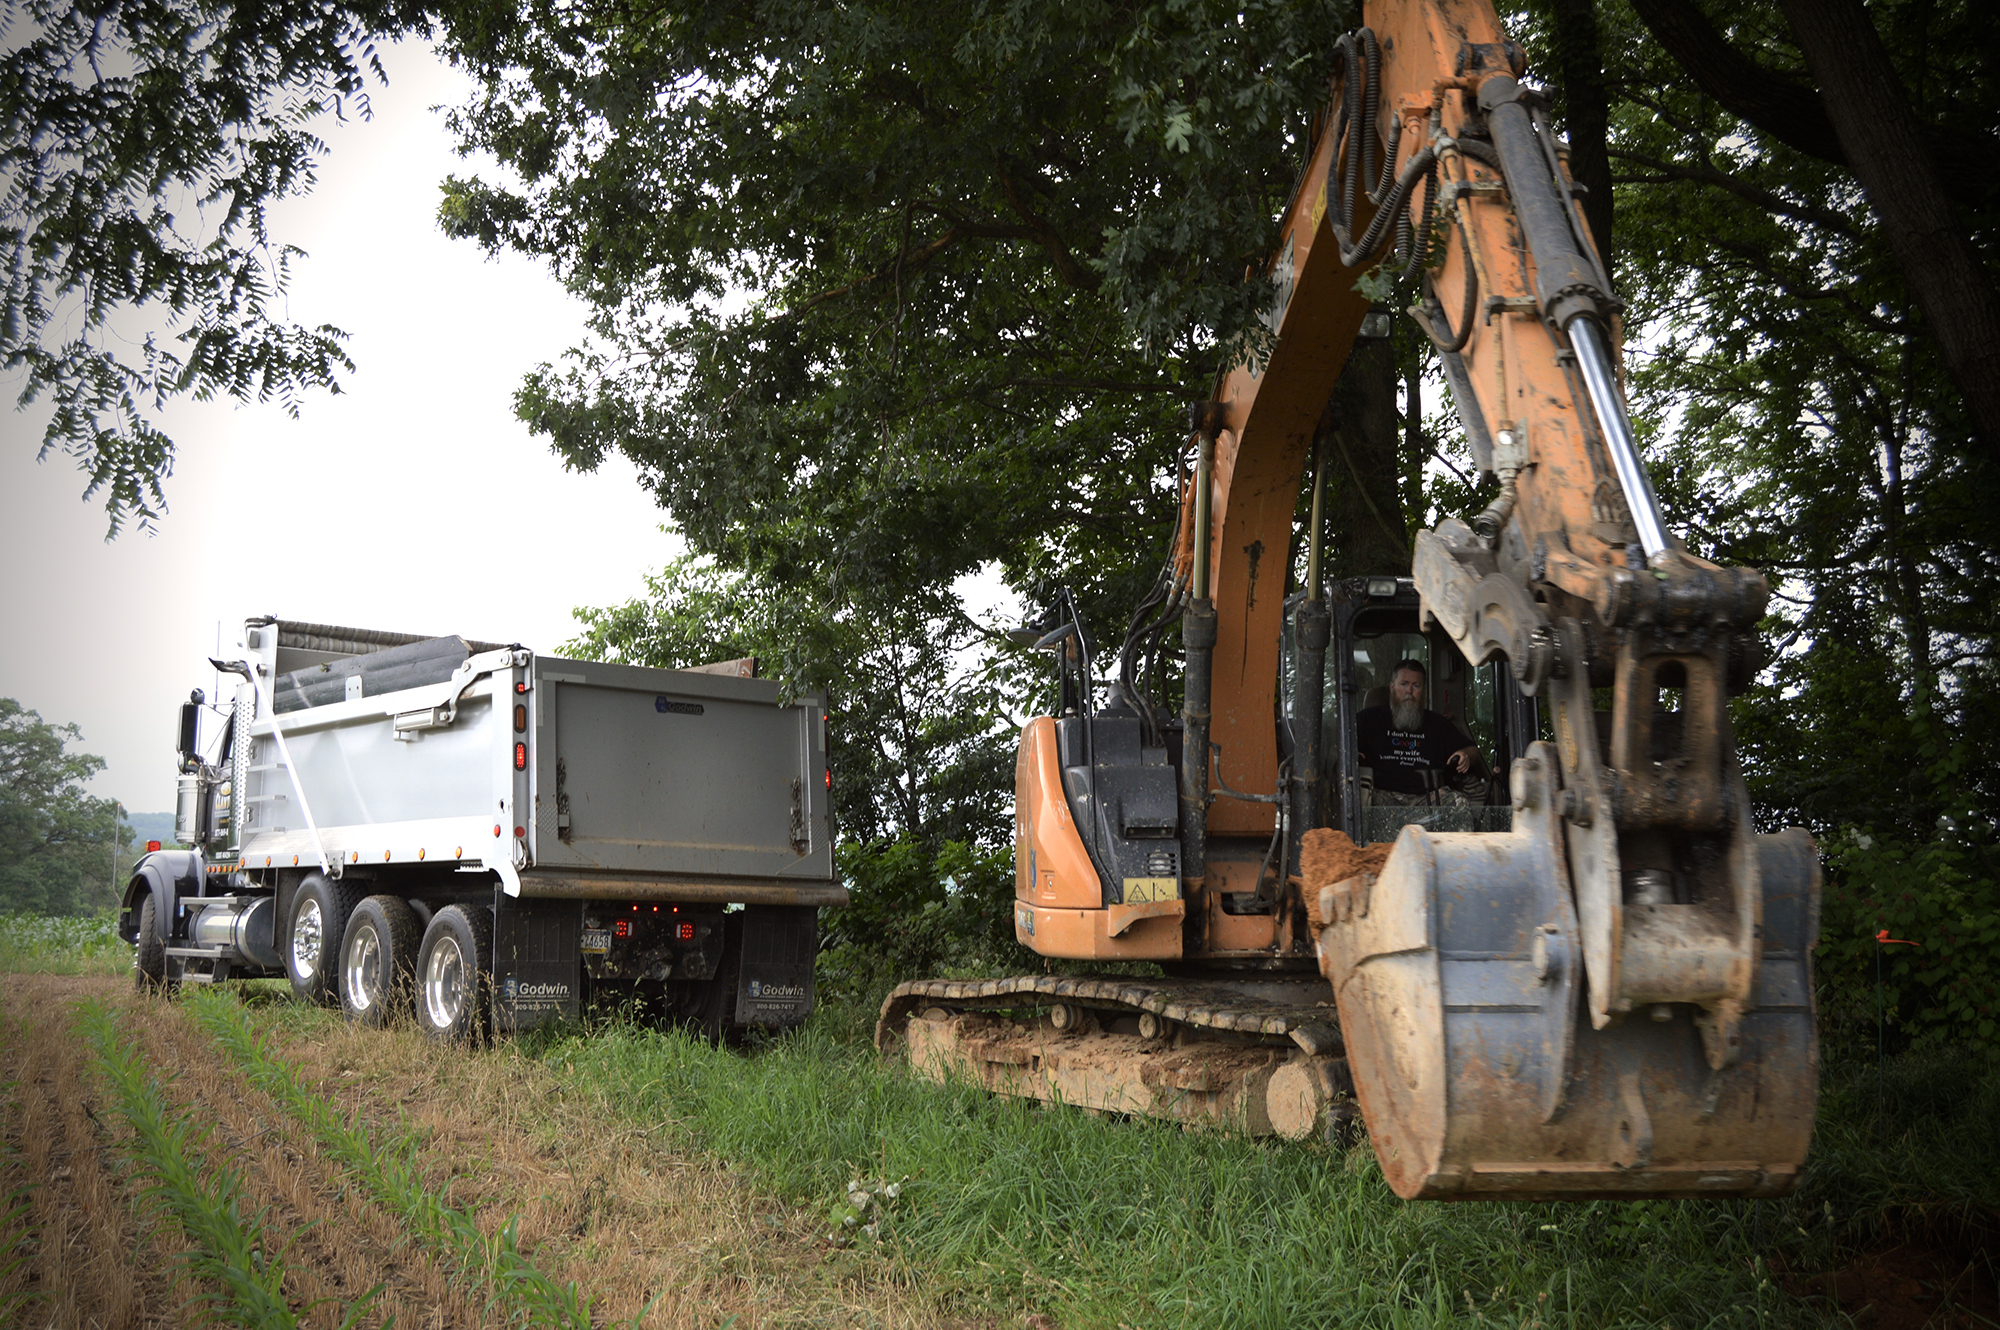 An excavator and dump truck at work on agricultural land.